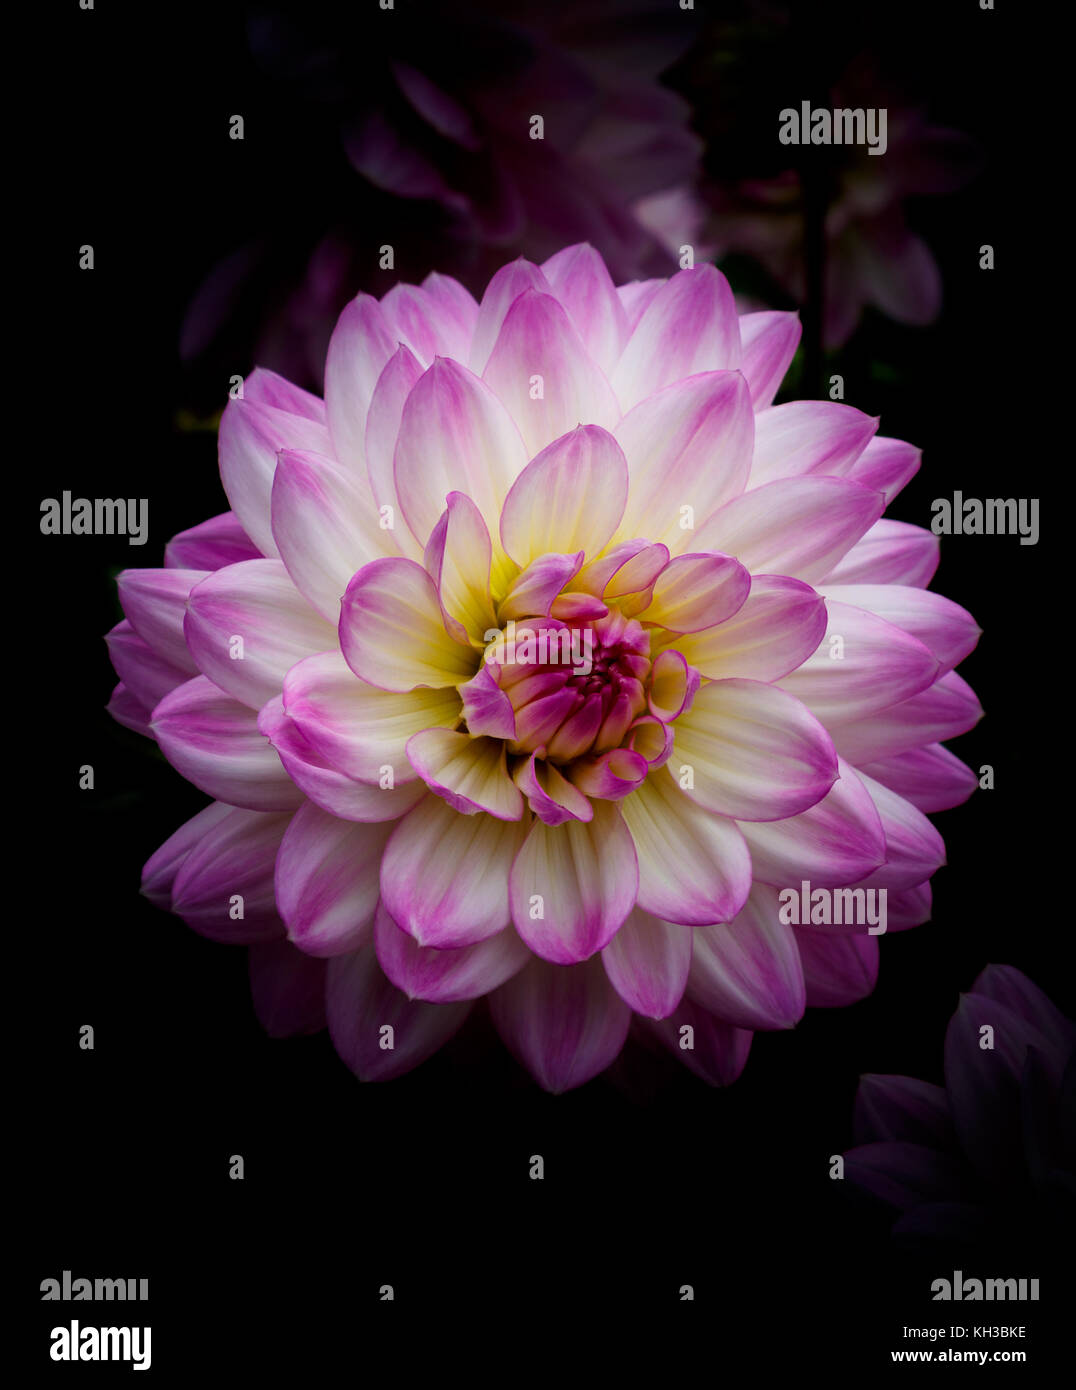 Single dahlia flower blossom with pink and white petals Stock Photo